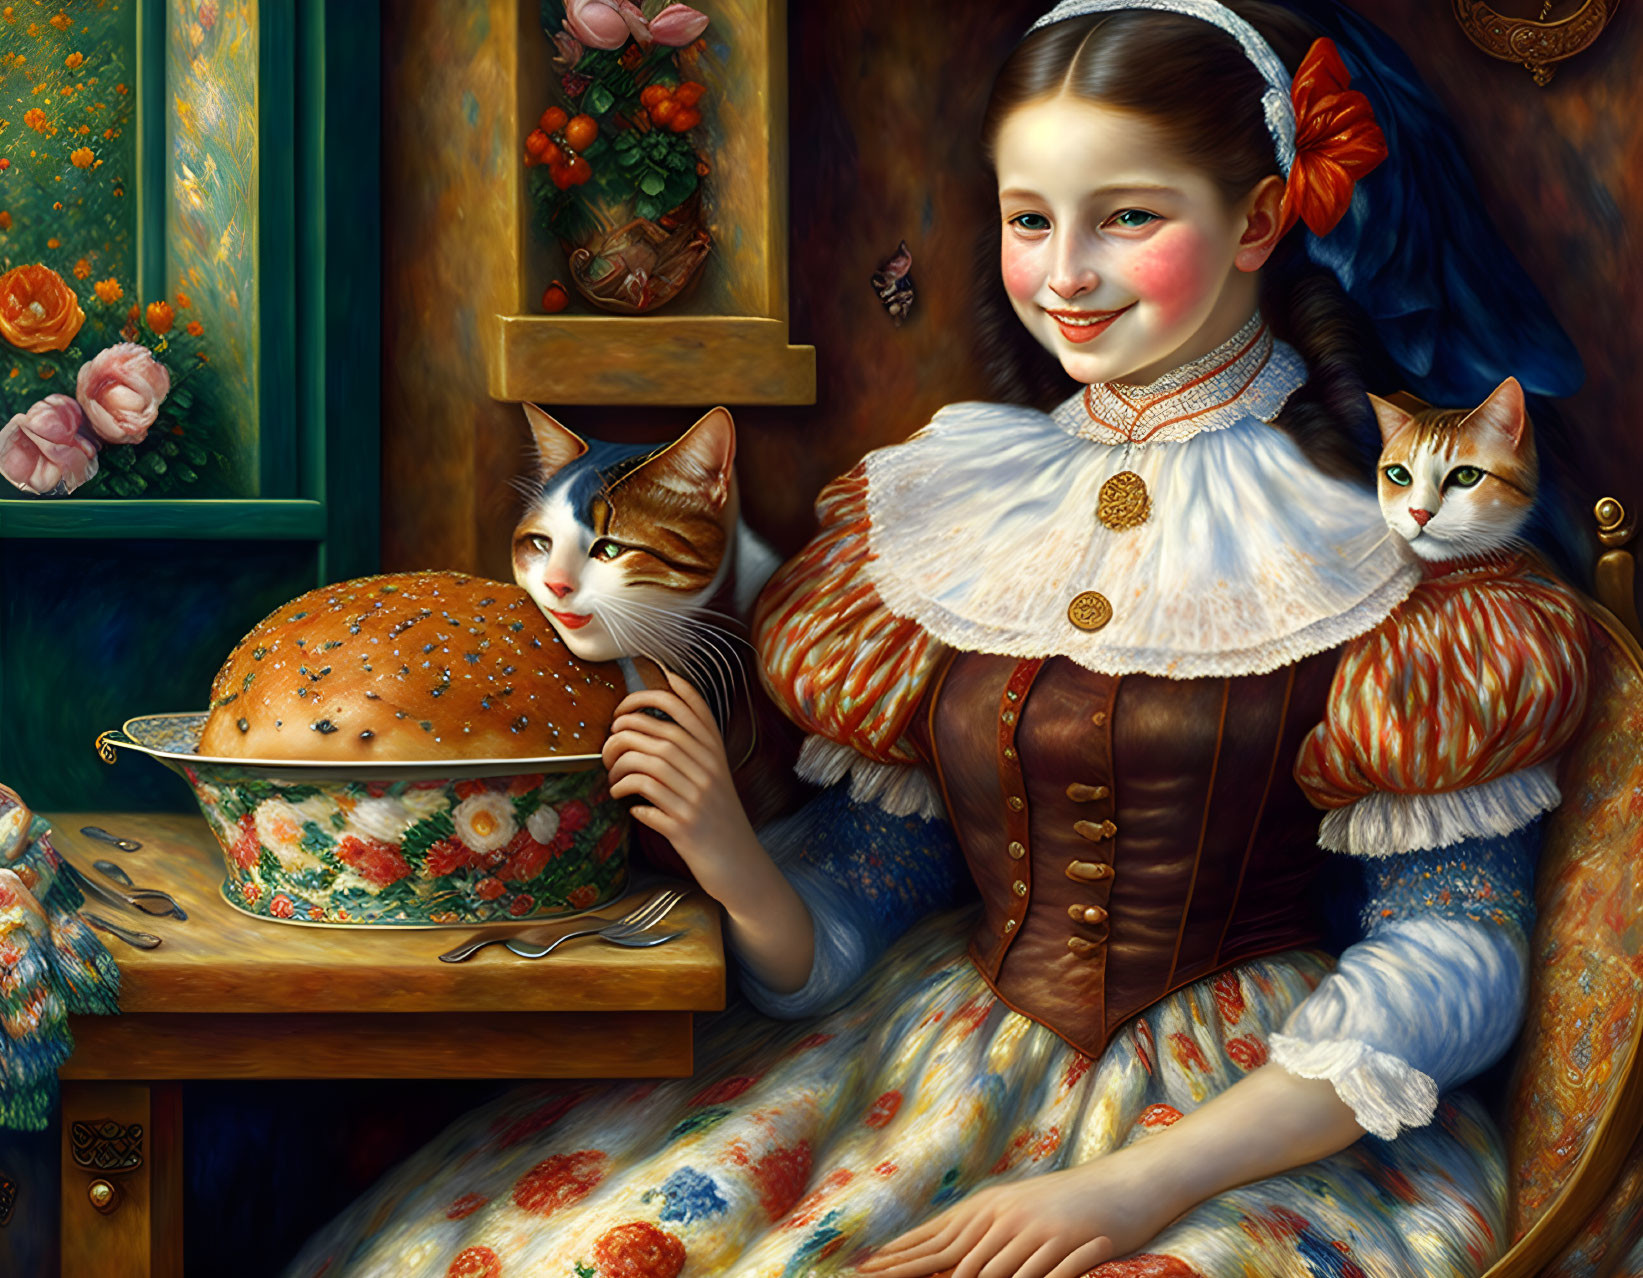 Portrait of Smiling Woman in Historical Dress with Cats, Bread, and Butterfly